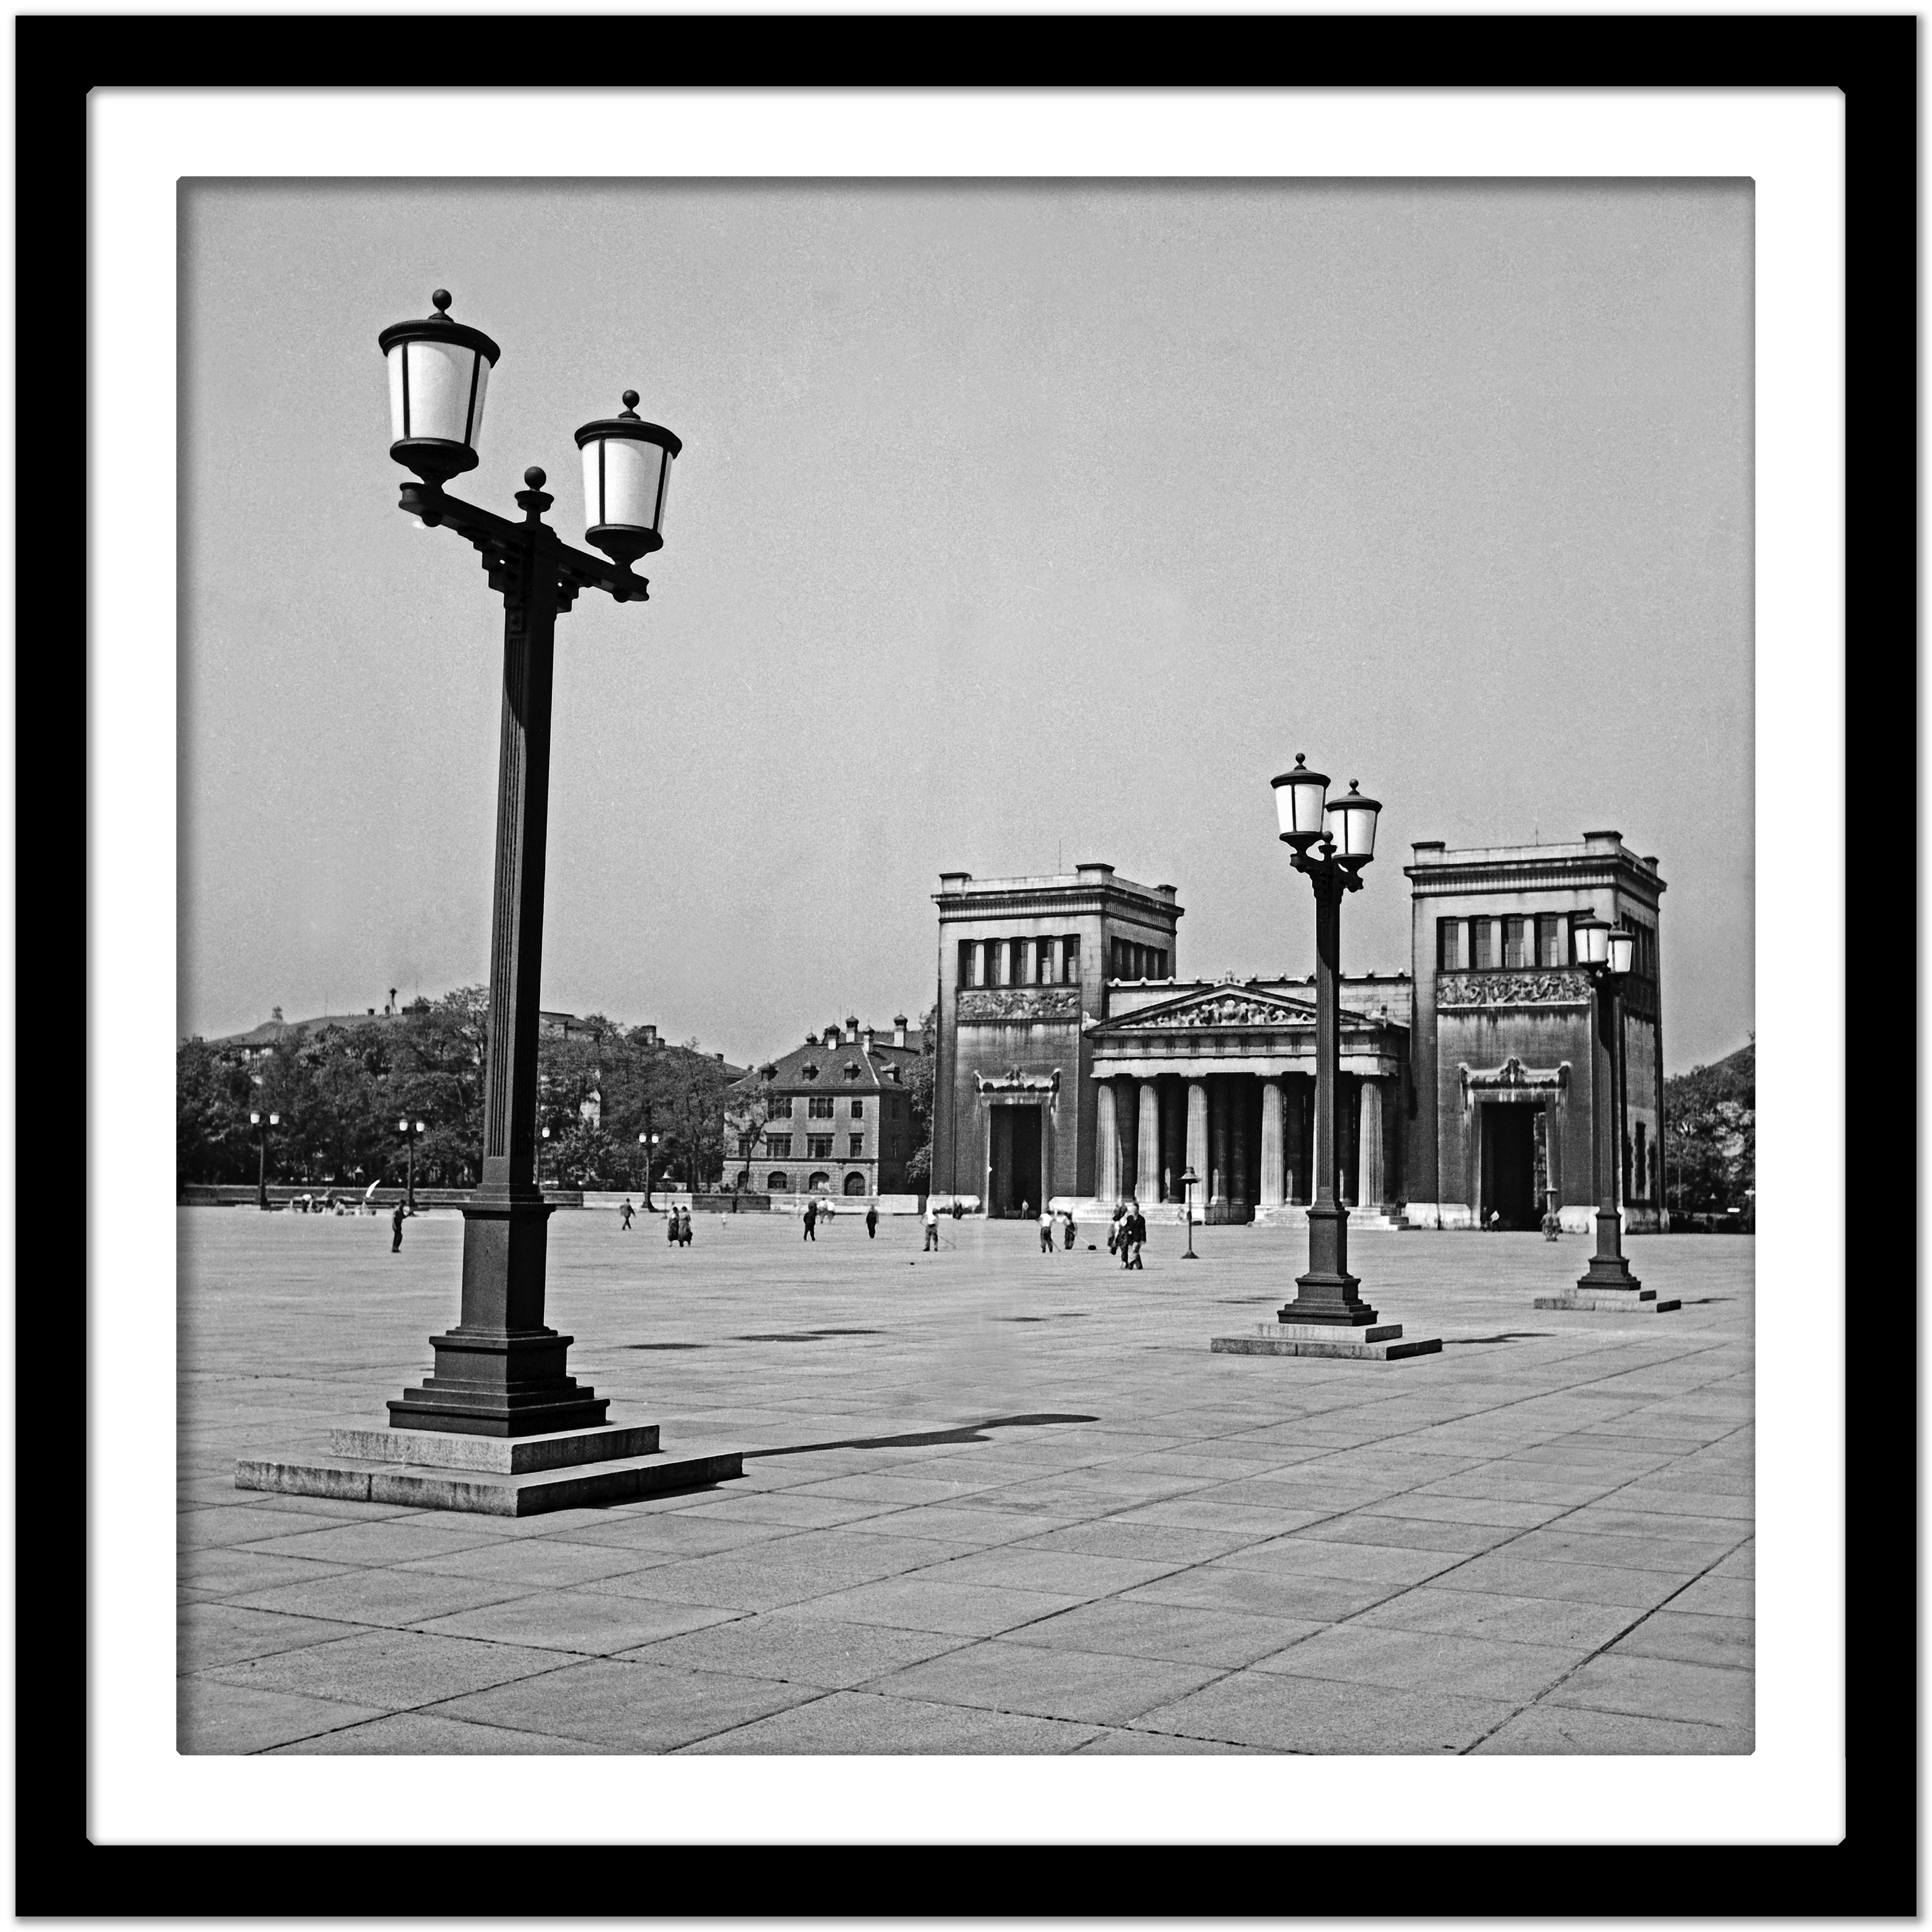 Temple at the Koenigplatz square in the city, Munich Germany 1937, Printed Later - Gray Black and White Photograph by Karl Heinrich Lämmel